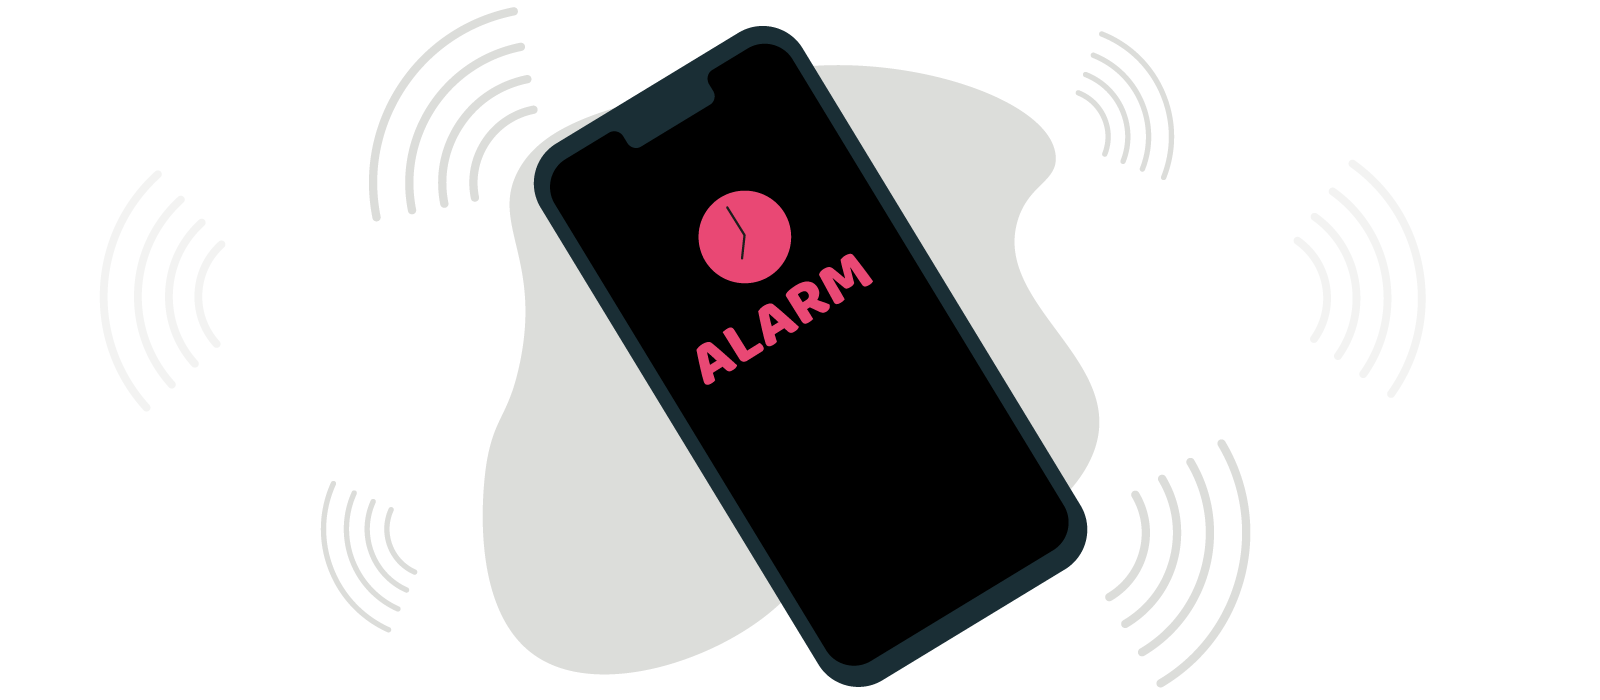 Mobile phone with alarm going off